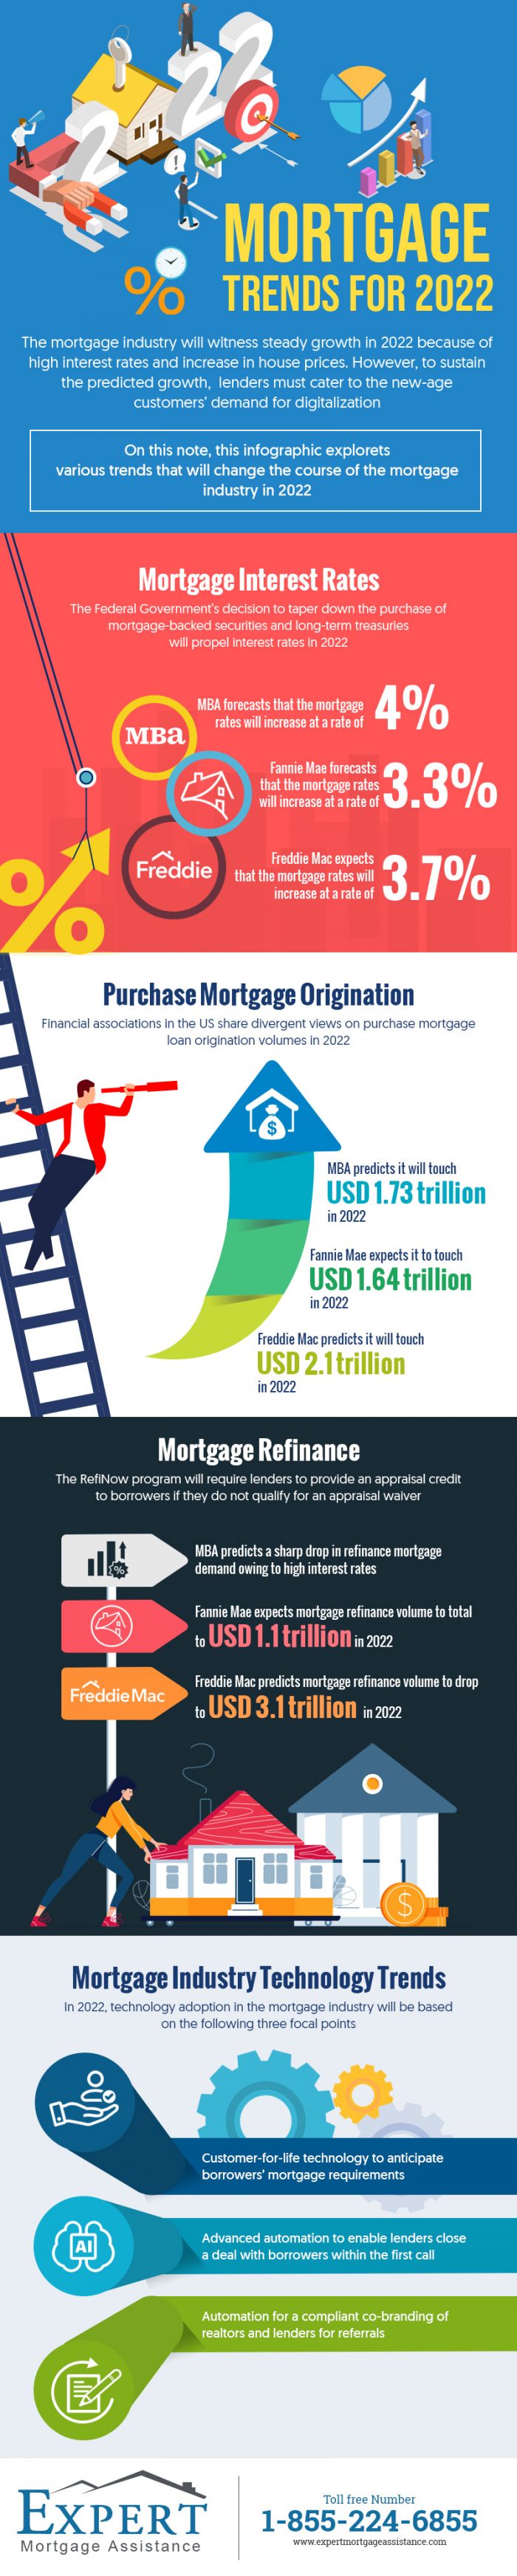 Mortgaga Trends for 2022